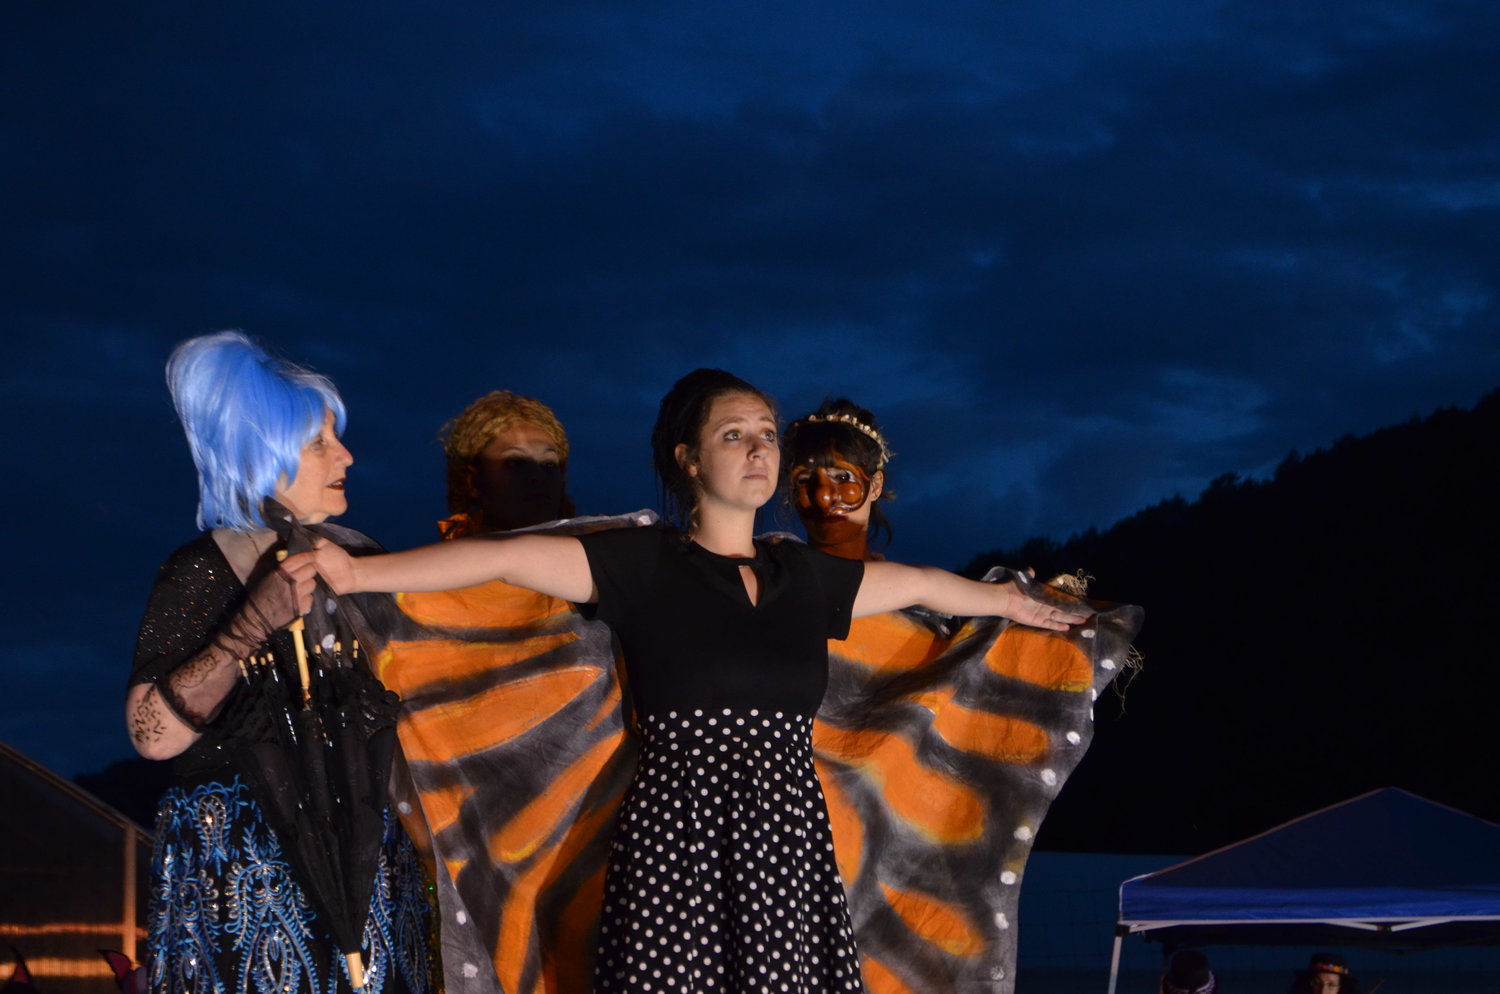 The microcosmic team, represented by Cilly the Microbe (played by Annie Hat, back left), Corn (played by Stefanie Workman) and Fungus (played by Marguerite Boissonnault) supports a Butterfly struggling with the effects of climate change (played by Julia Kehrley).